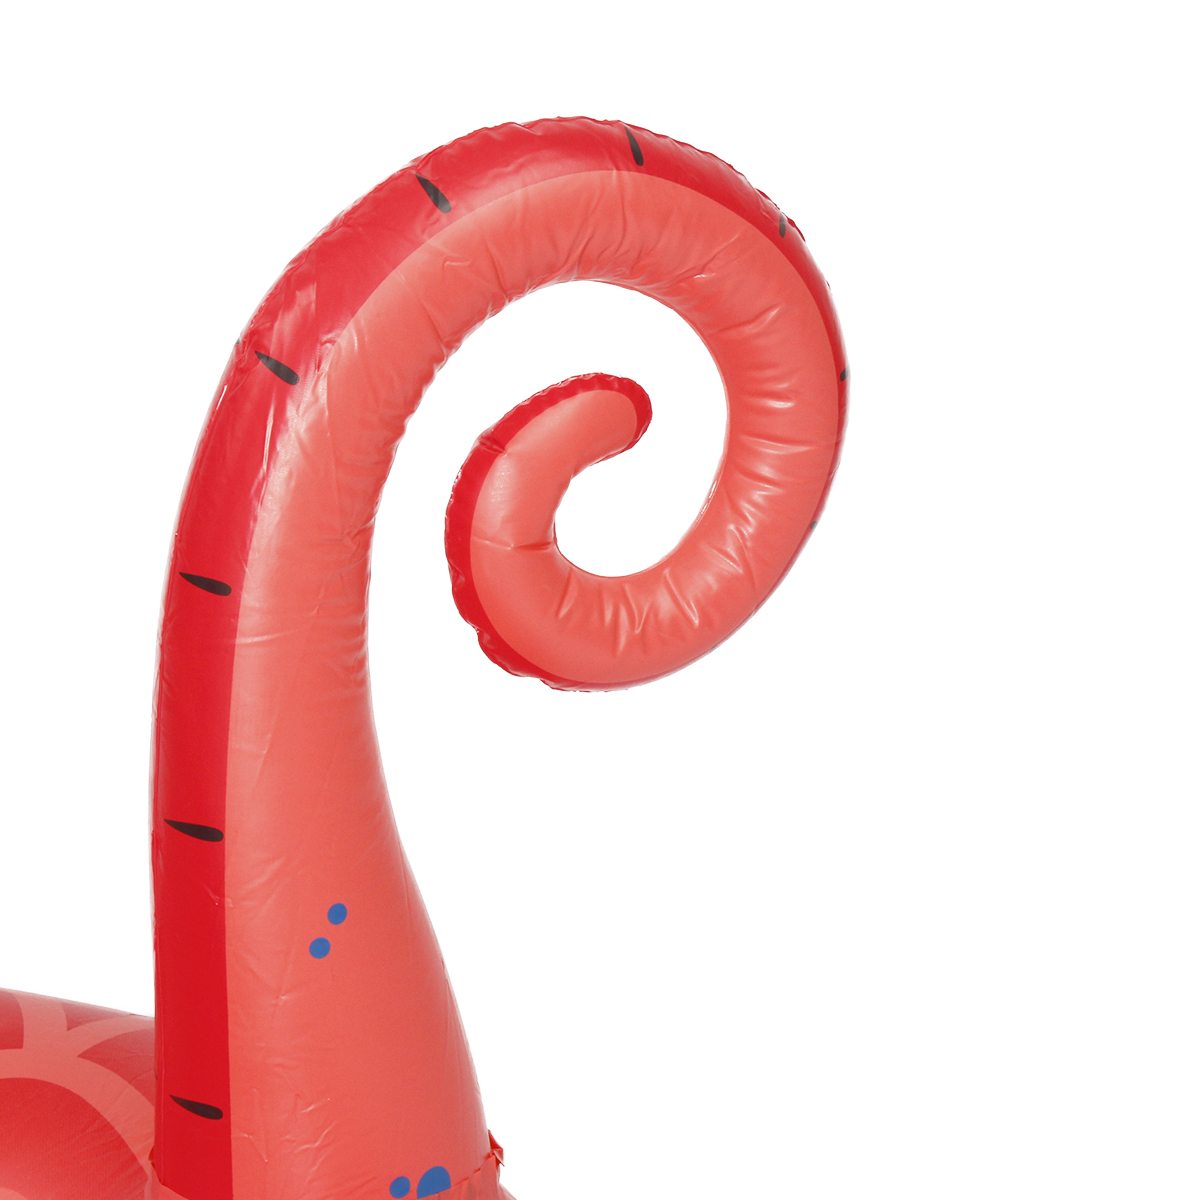 Large-Seahorse-Inflatable-Hippocampus-Giant-Swimming-Pool-Ring-Floats-Bed-Water-Pool-Raft-Camping-Be-1723619-8